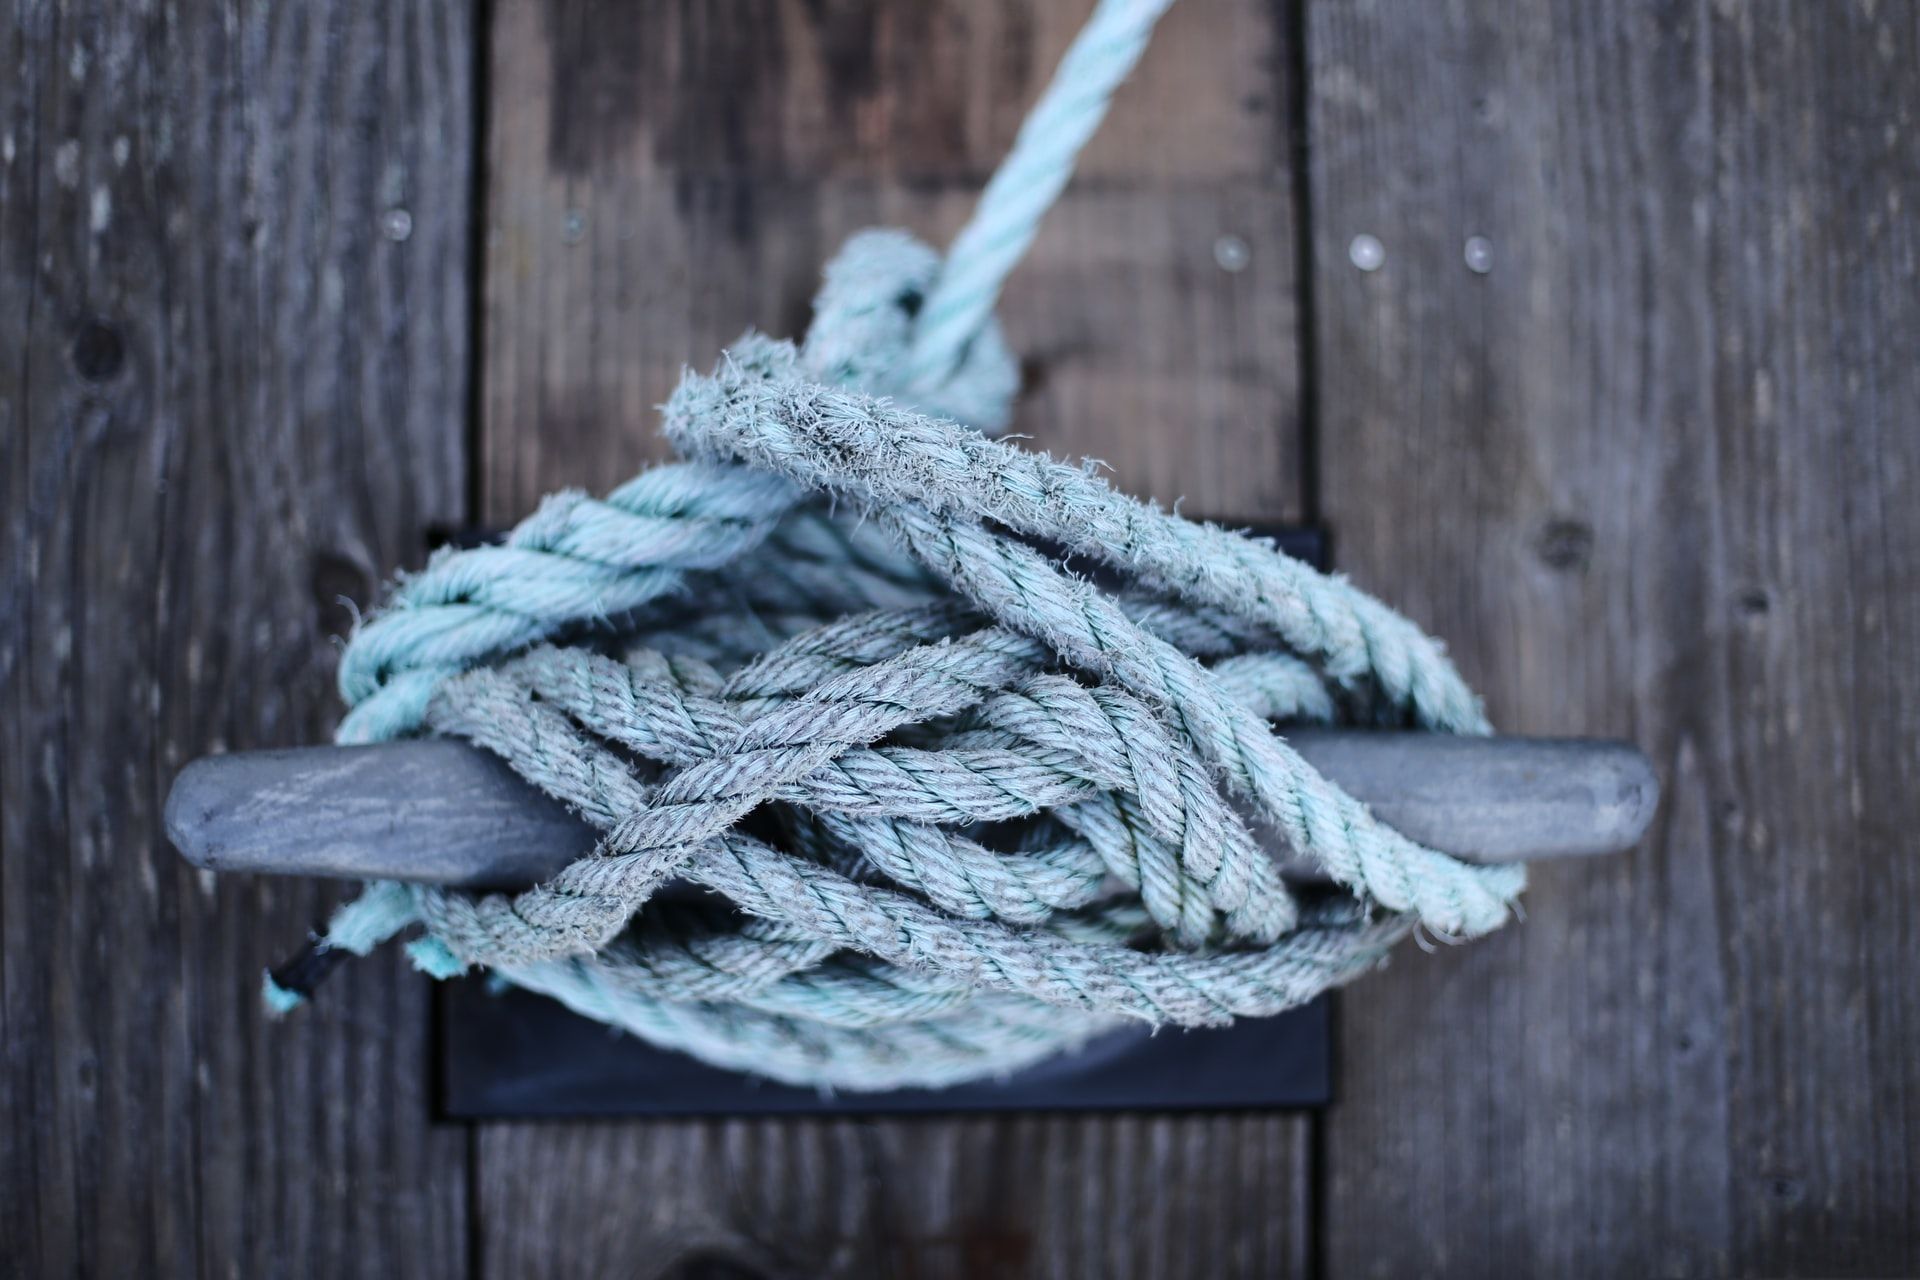 A rope tied around a cleat on a dock